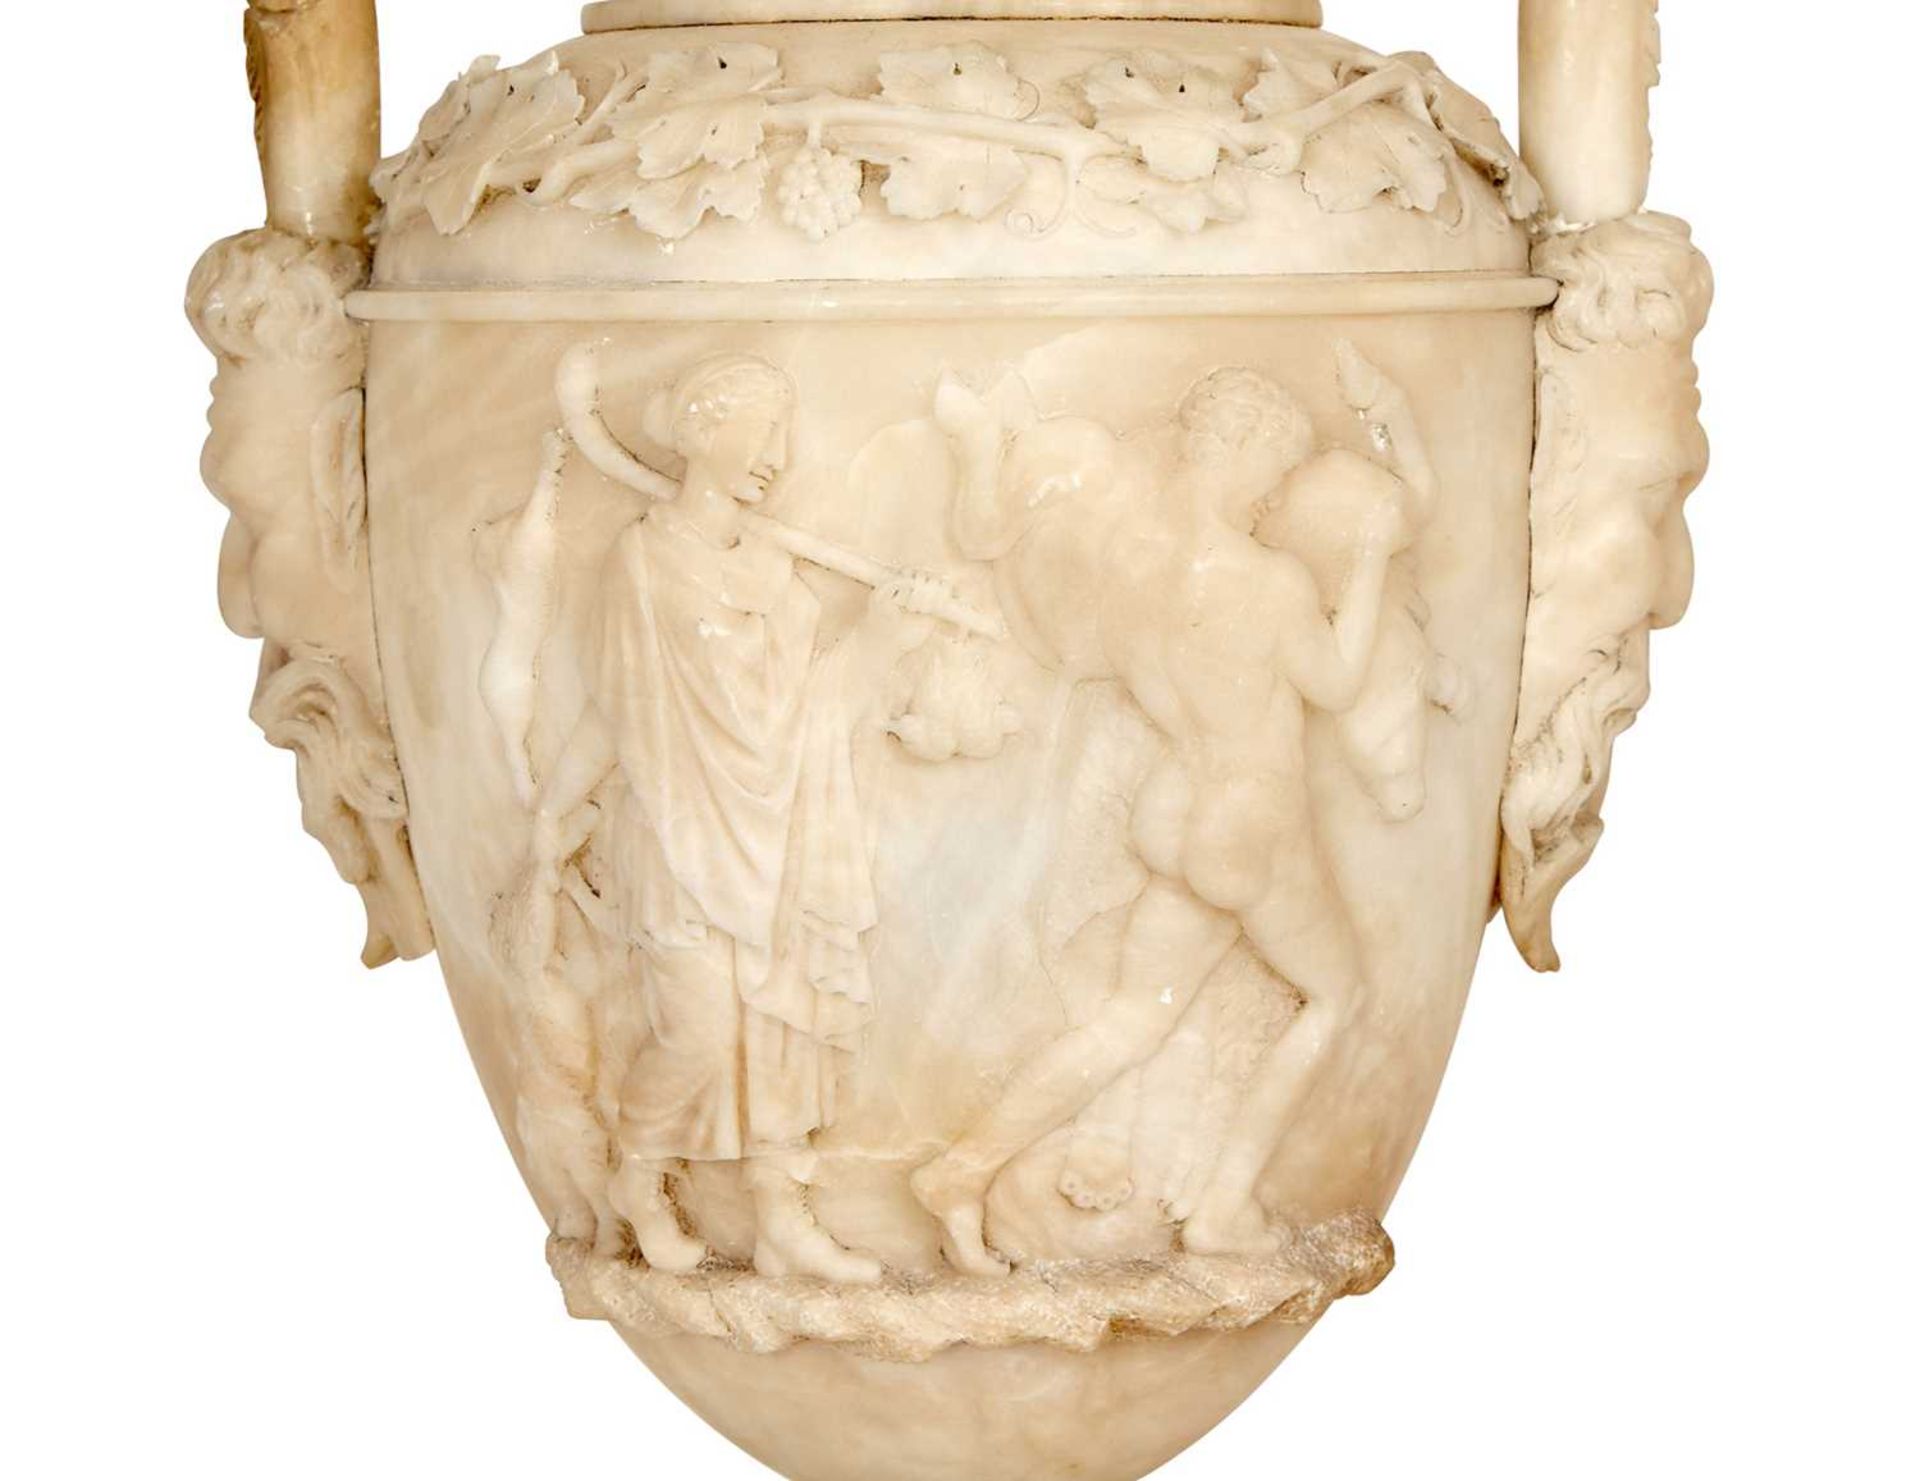 A LARGE PAIR OF 19TH CENTURY ITALIAN ALABASTER URNS AND COVERS IN THE STYLE OF PIRANESI - Image 11 of 12